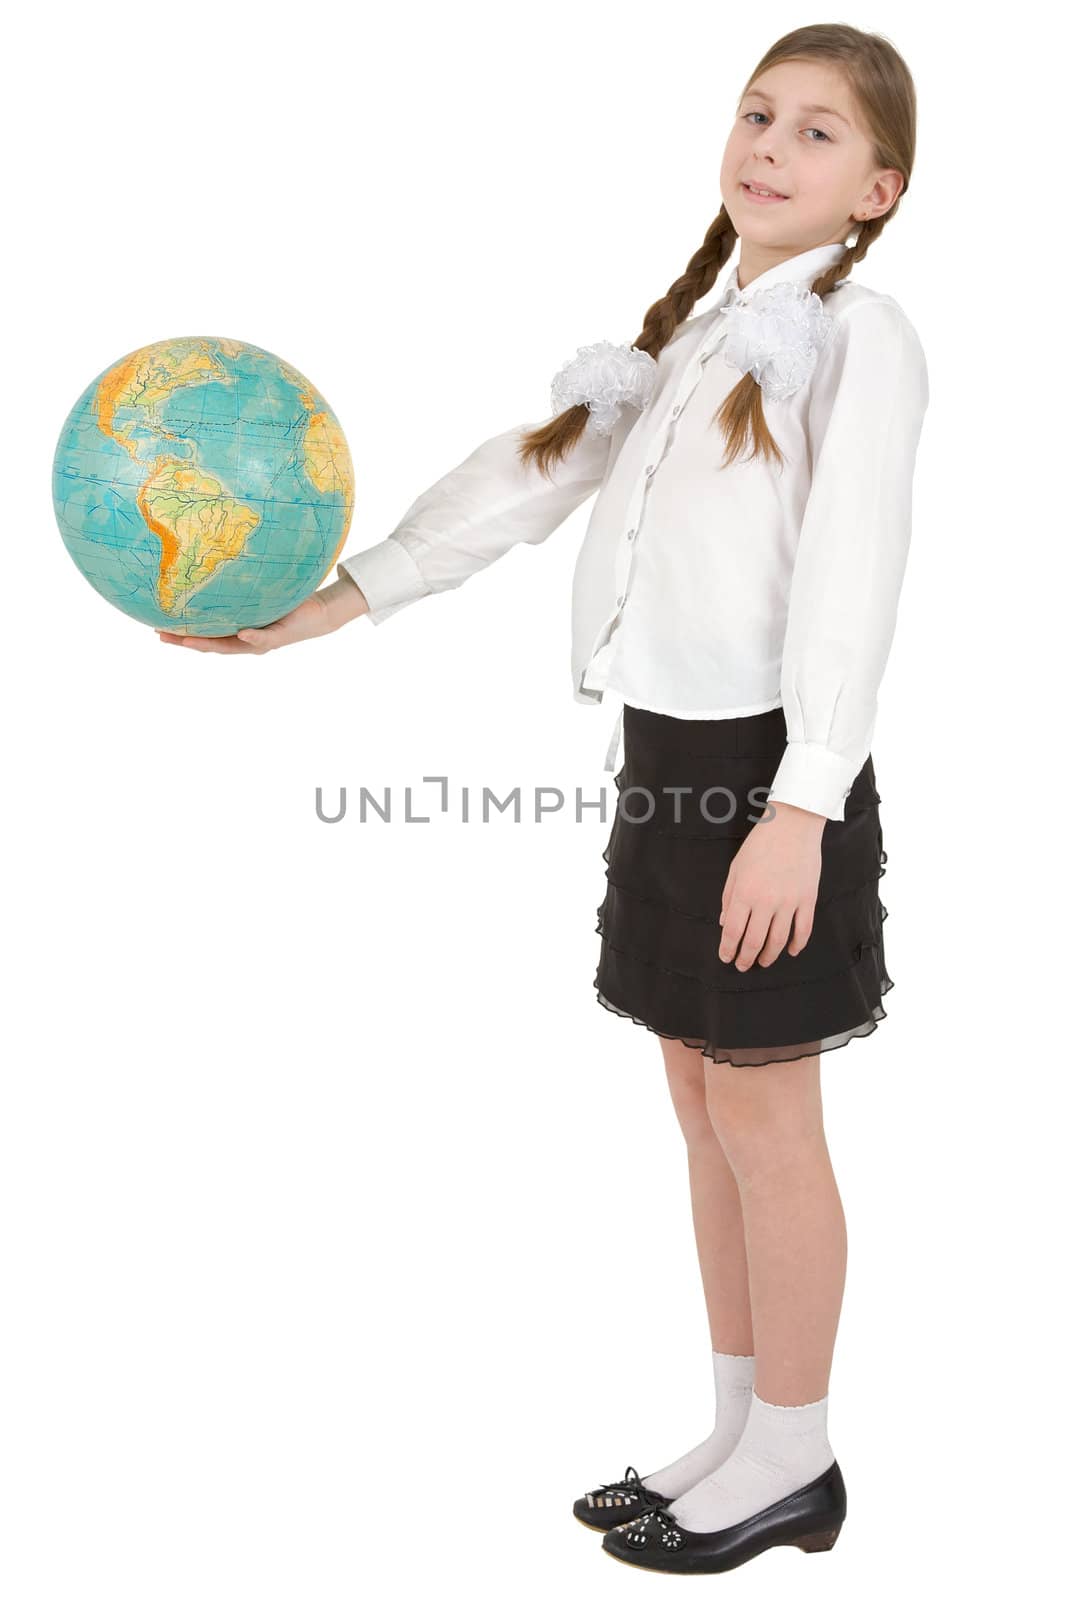 Girl and terrestrial globe on white by pzaxe